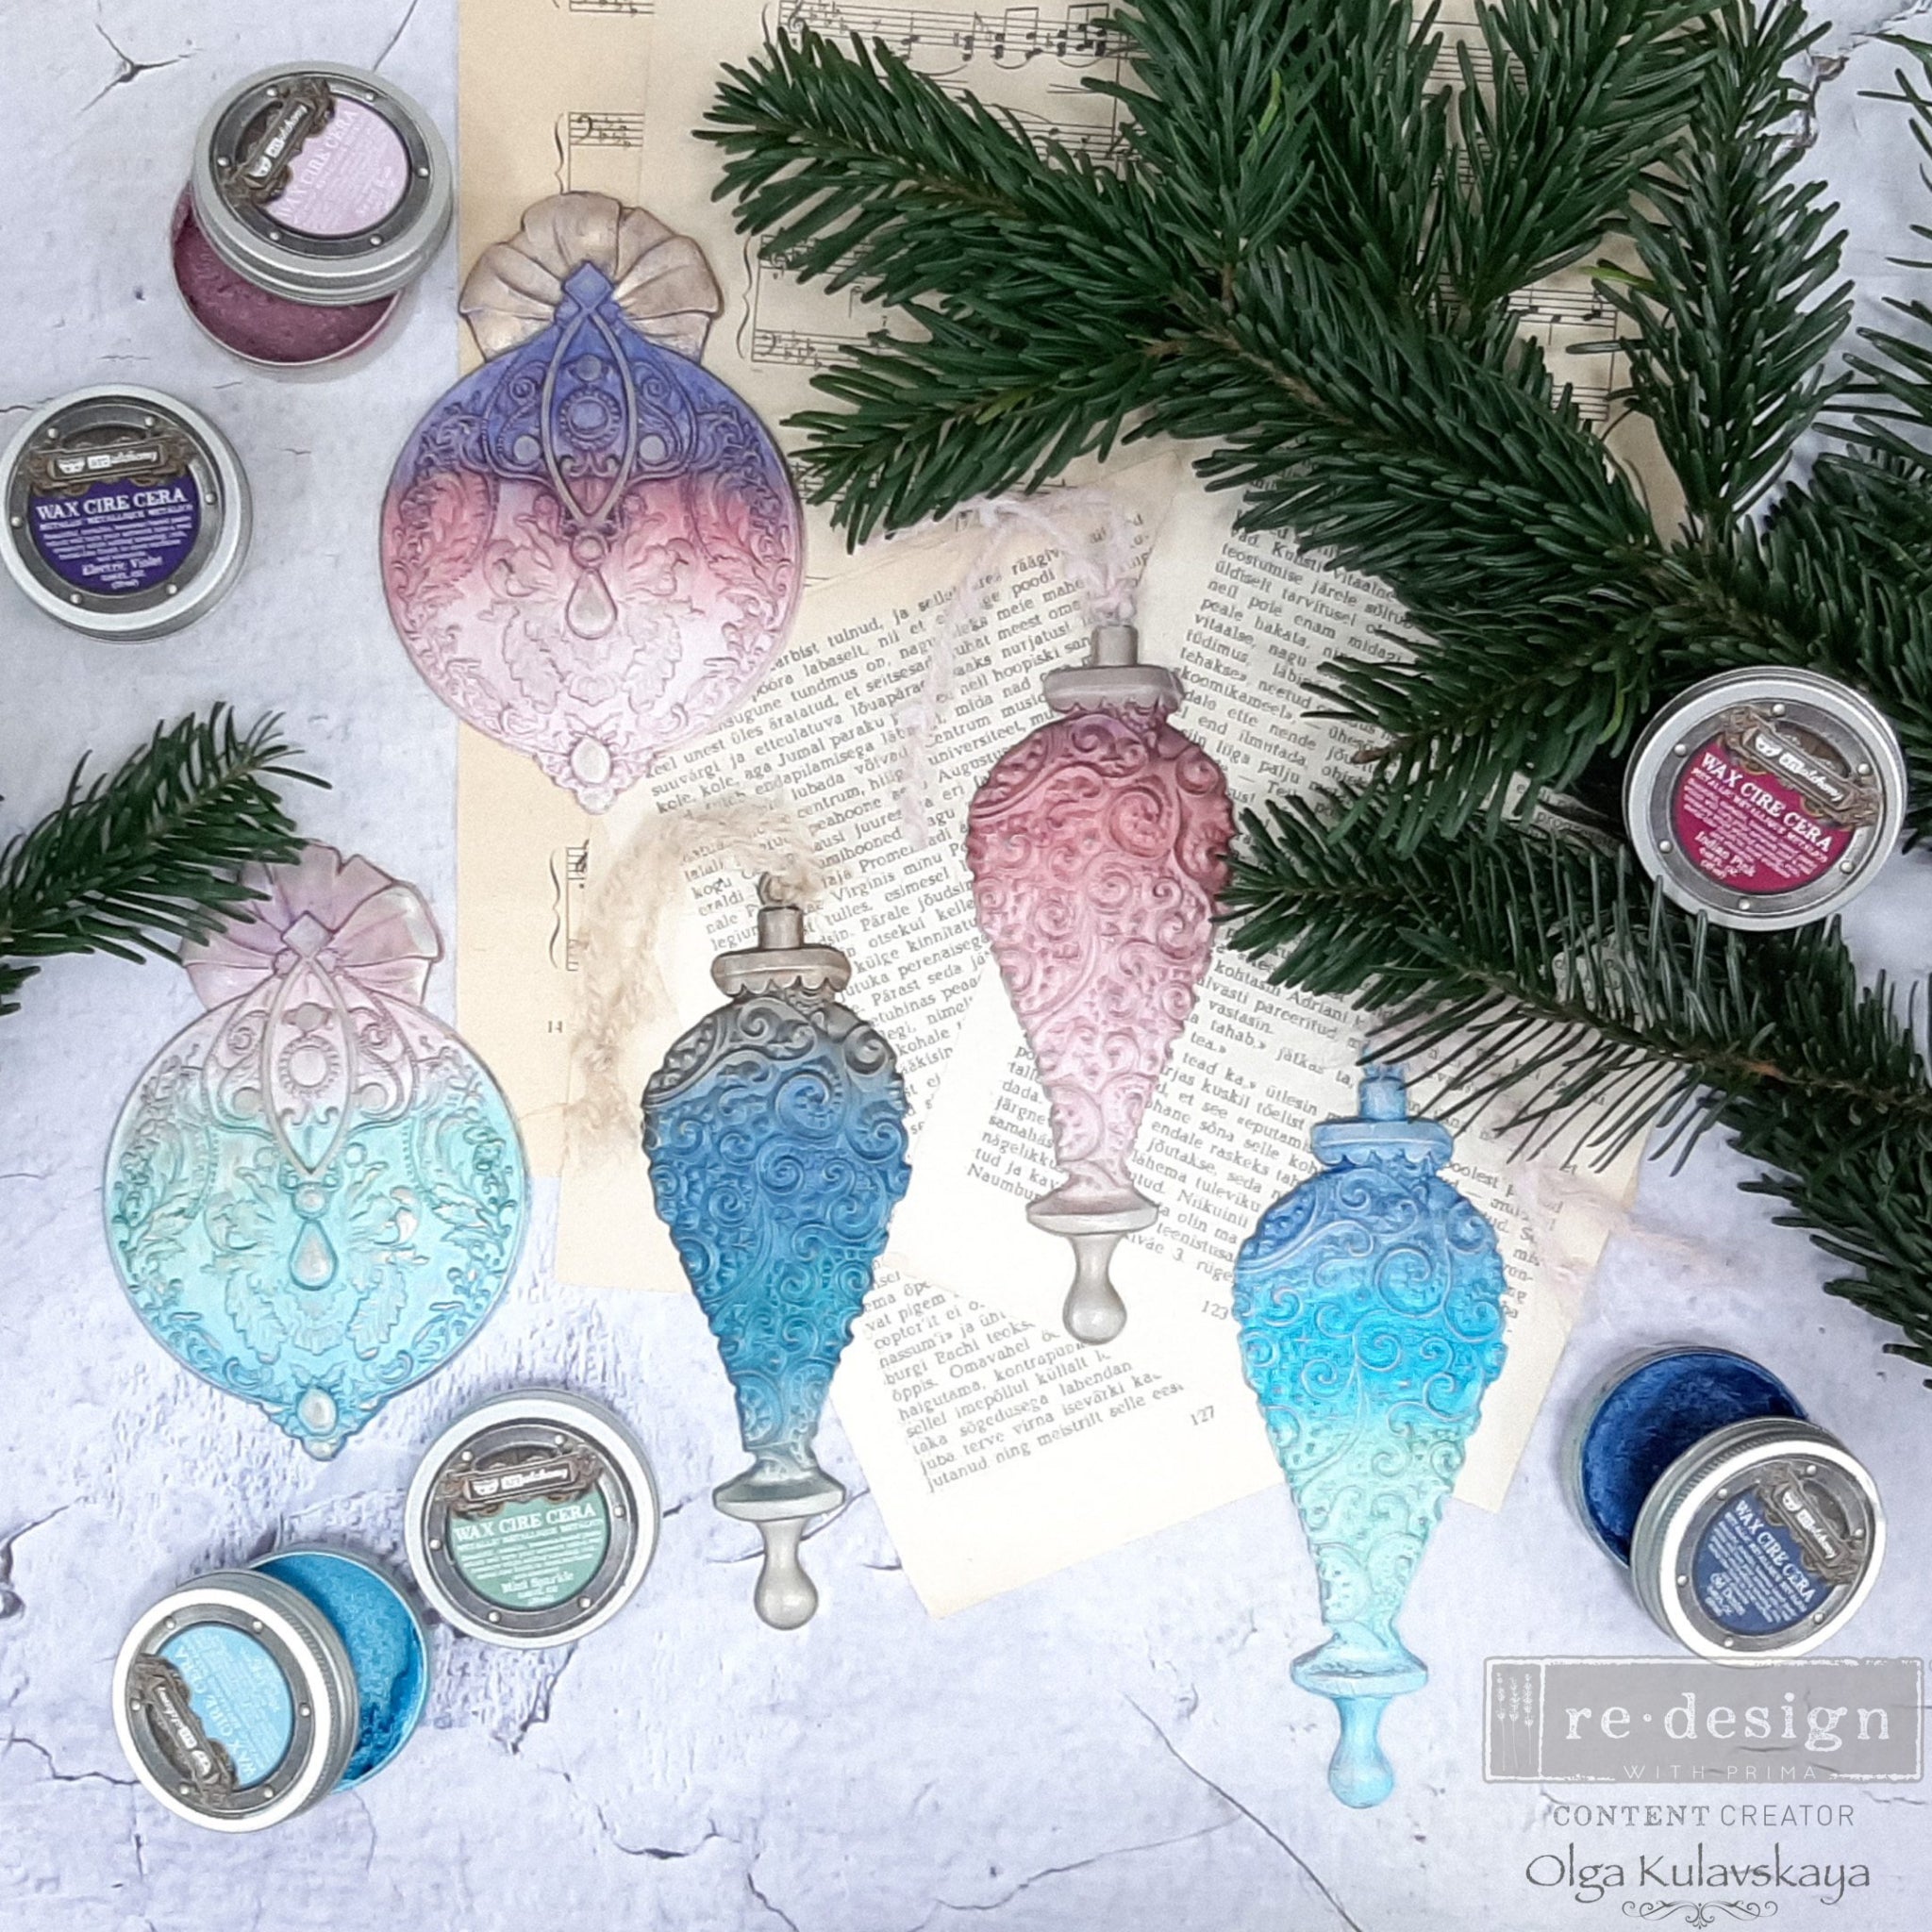 Castings of ReDesign with Prima's Silver Bells silicone mould are painted blends of pinks and blues.